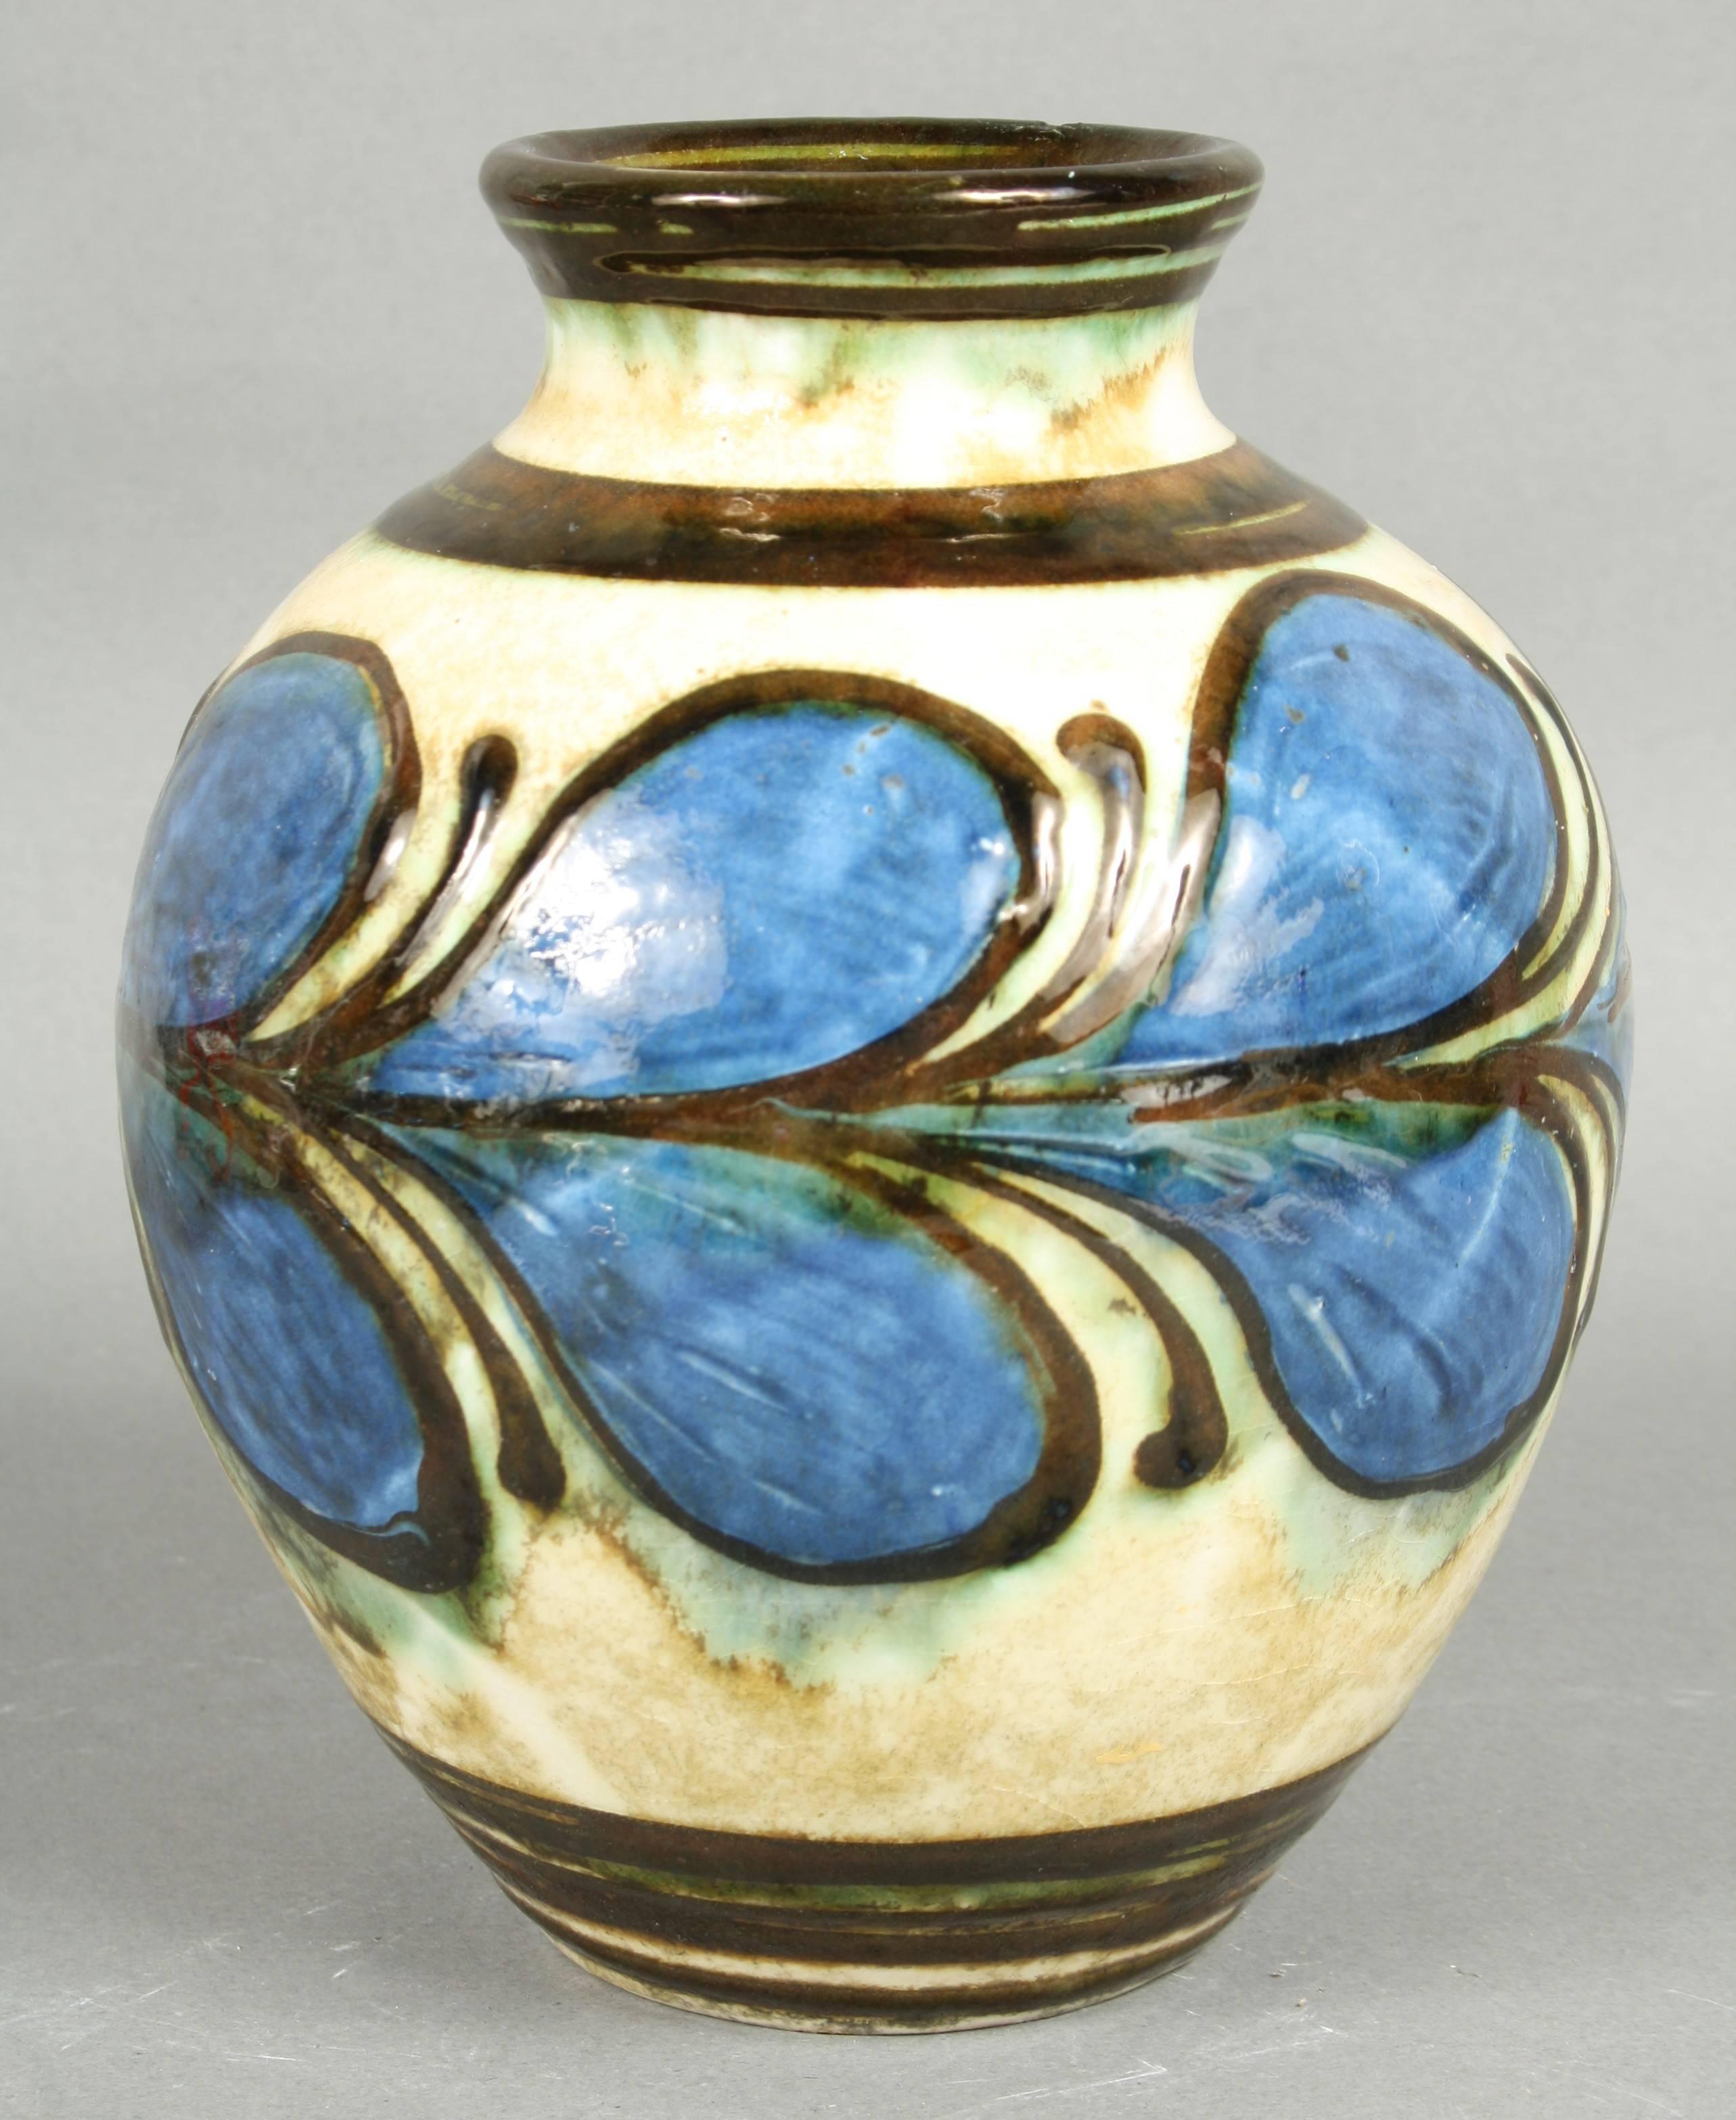 Kähler, HAK, glazed stoneware vase, 1930s. White glazed and blue leafs all the way around the vase. It has a small area where the glaze has crackles. Beautiful colours and shape.